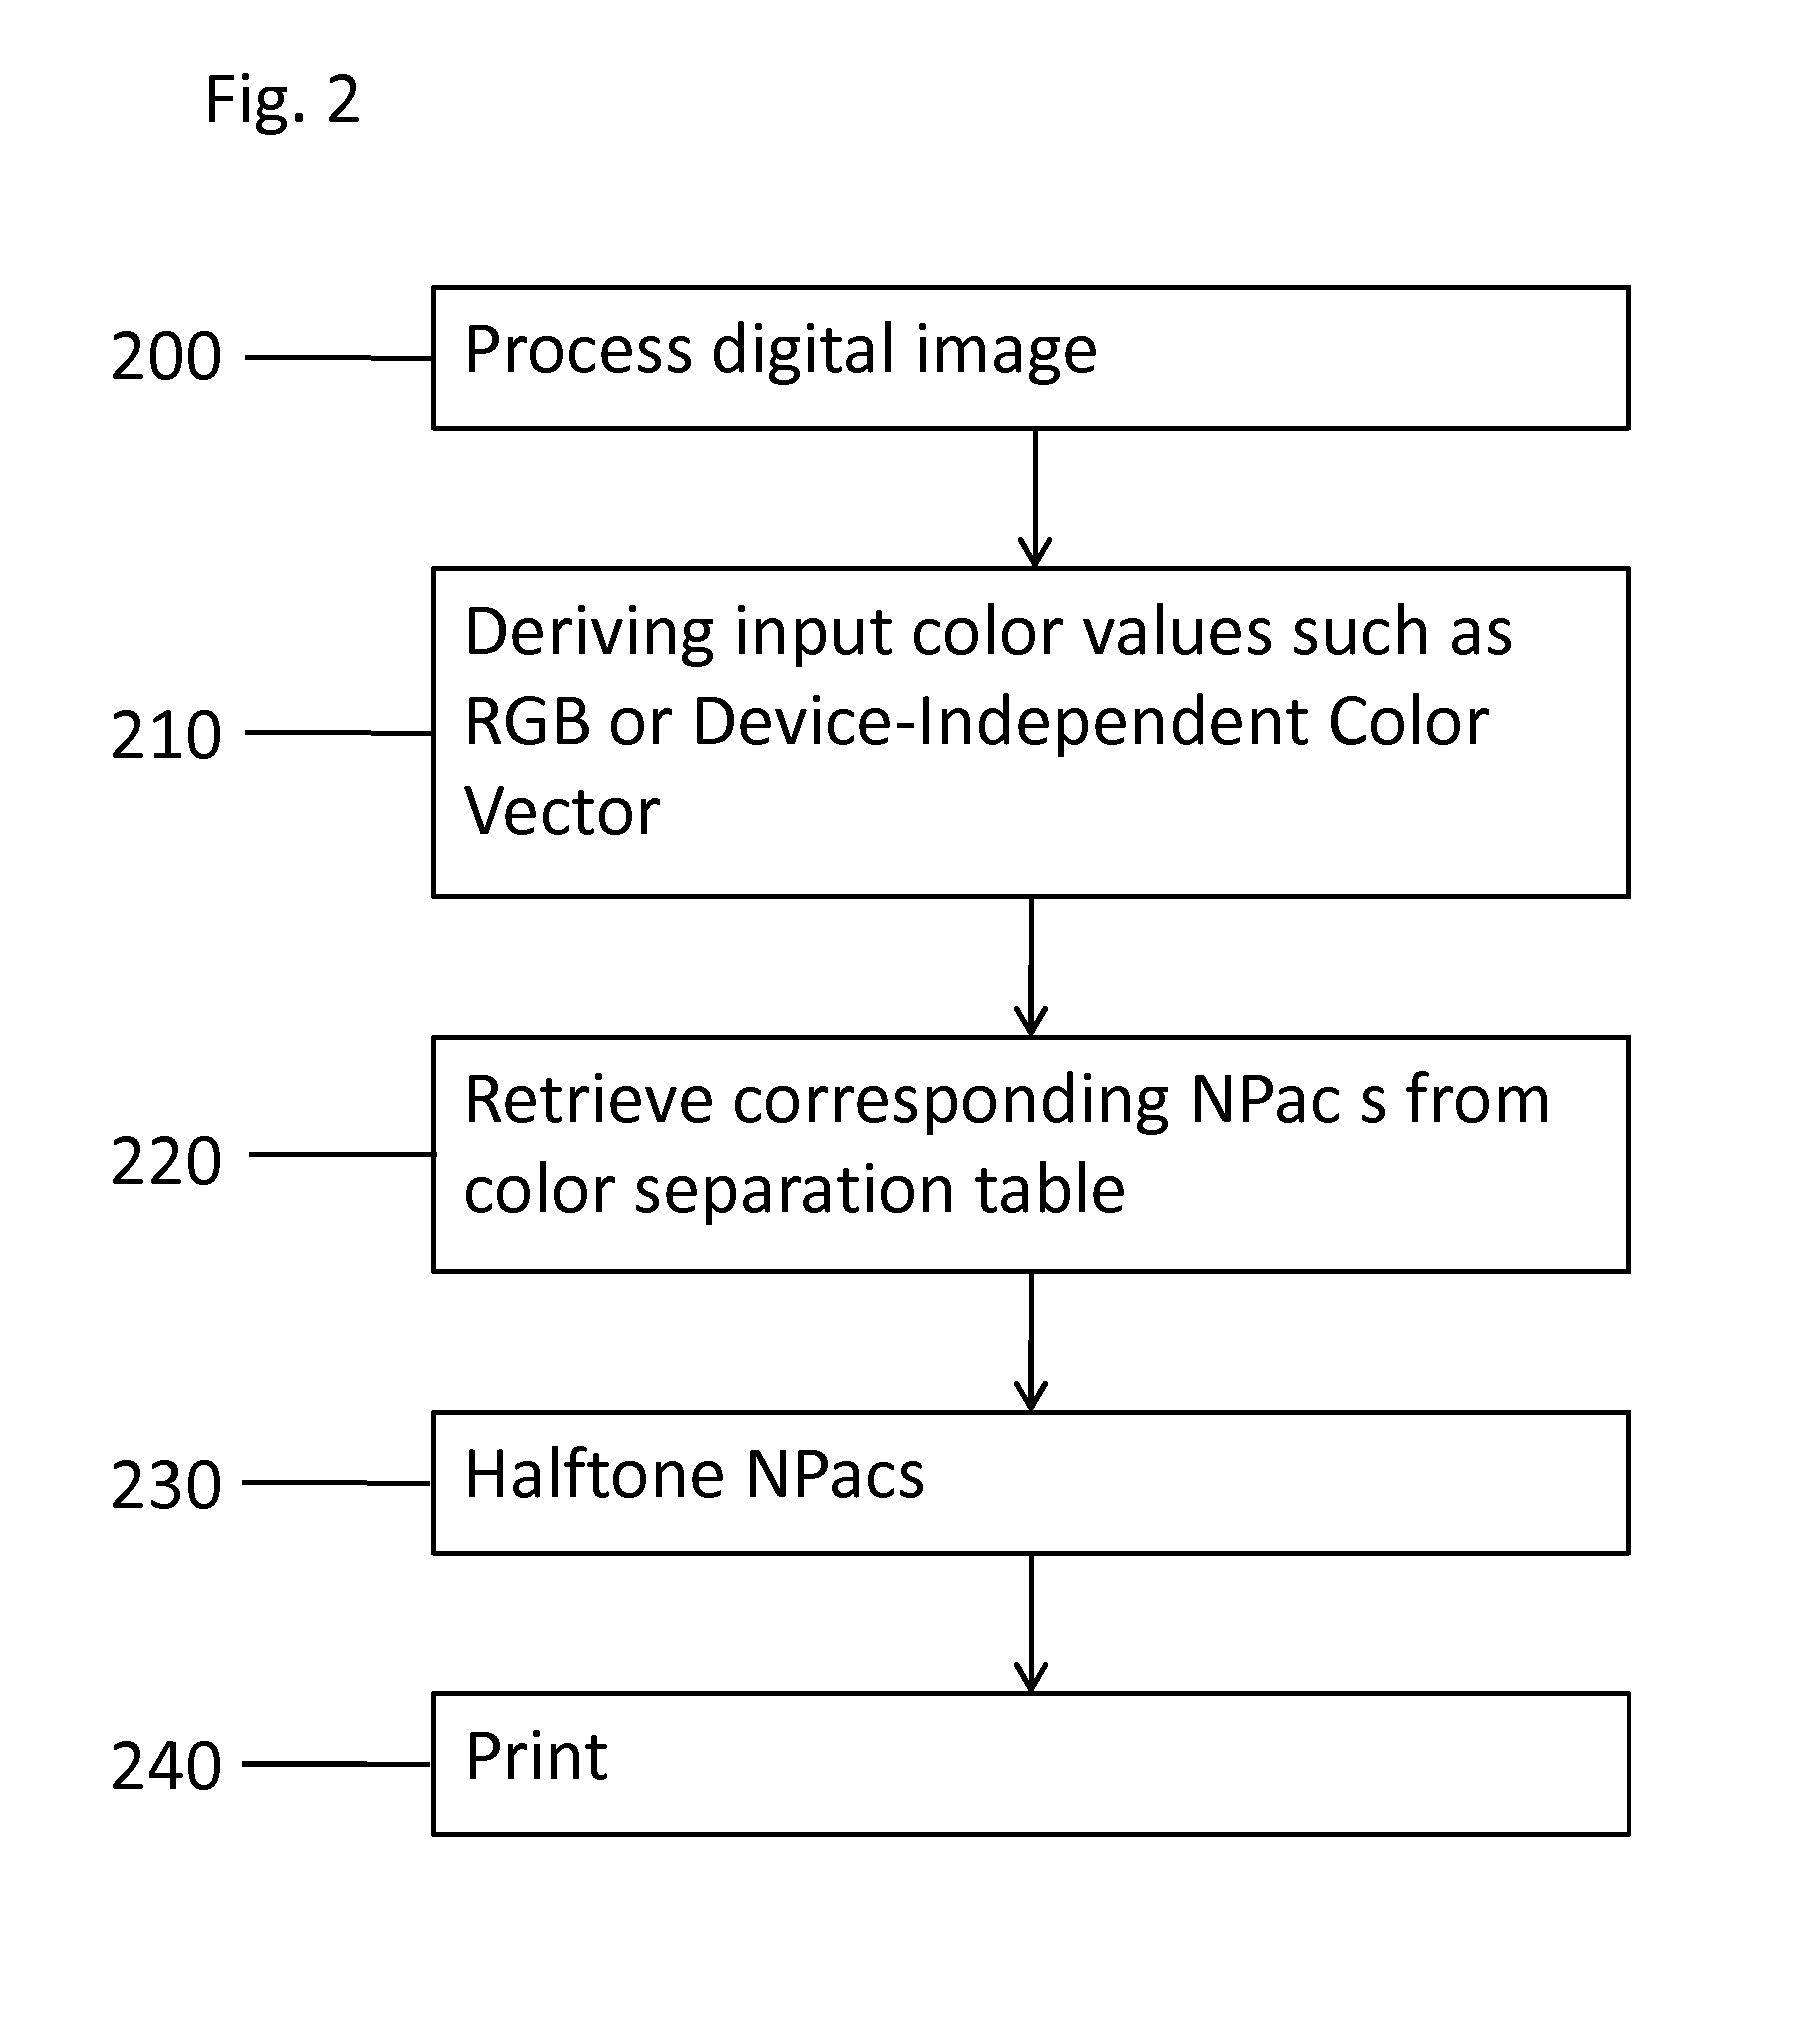 Color separation table optimized for a printing process according to a print attribute by selecting particular Neugebauer primaries and Neugebauer primary area coverages